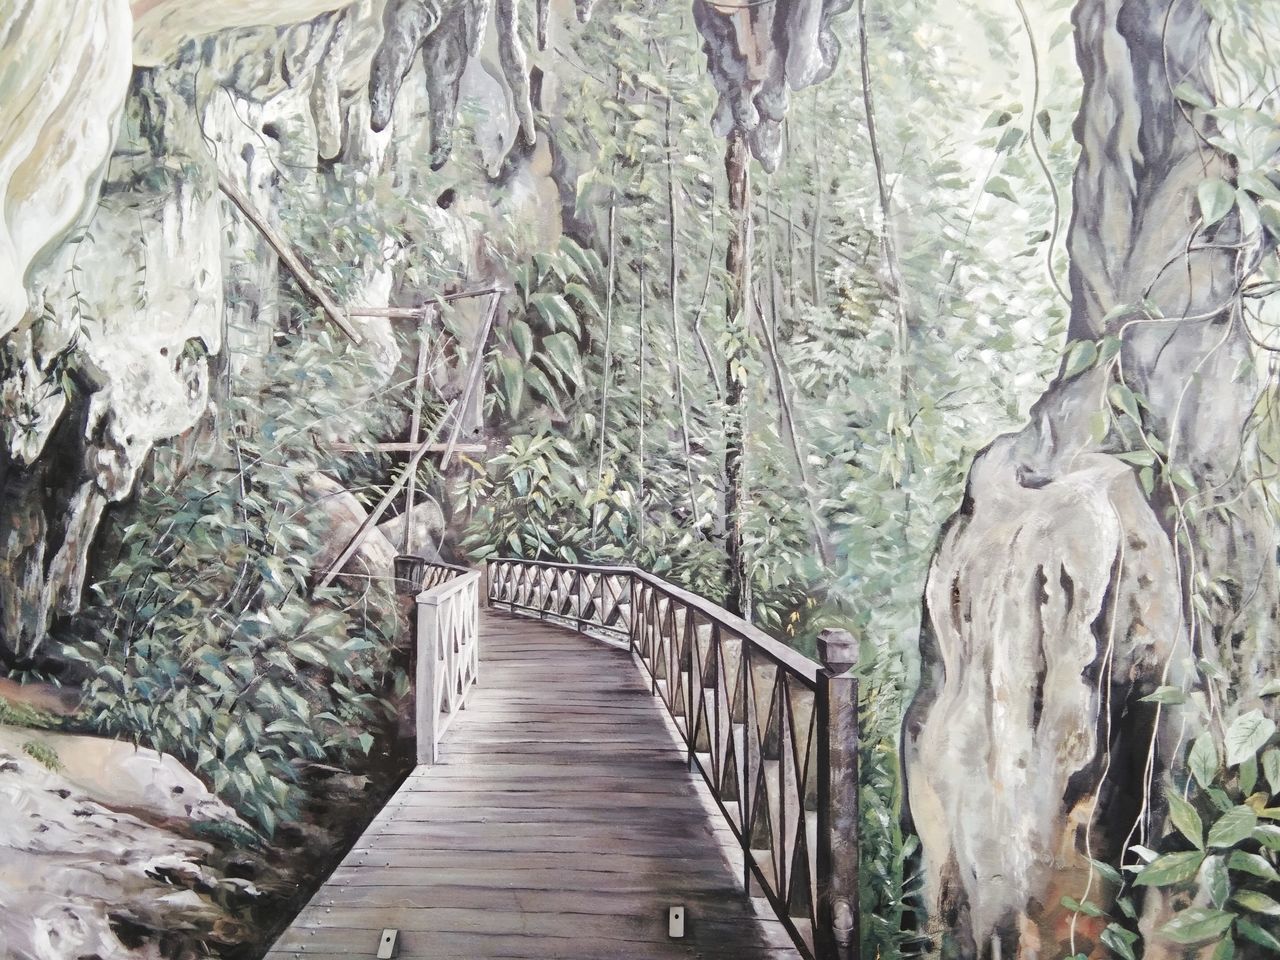 VIEW OF FOOTPATH IN FOREST